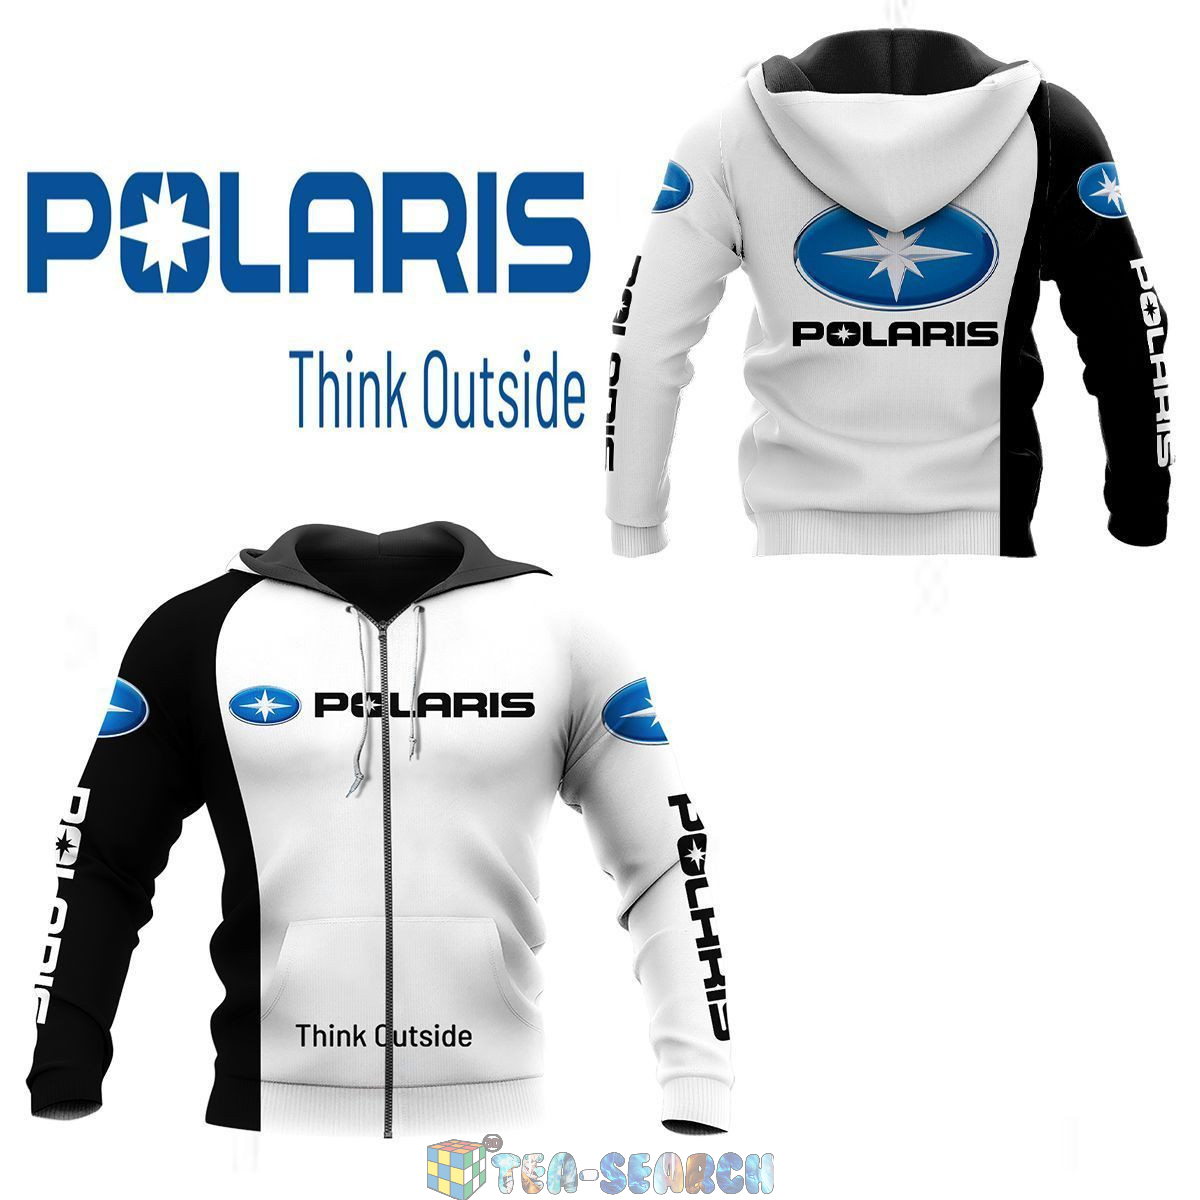 Polaris Think Outside White 3D hoodie and t-shirt